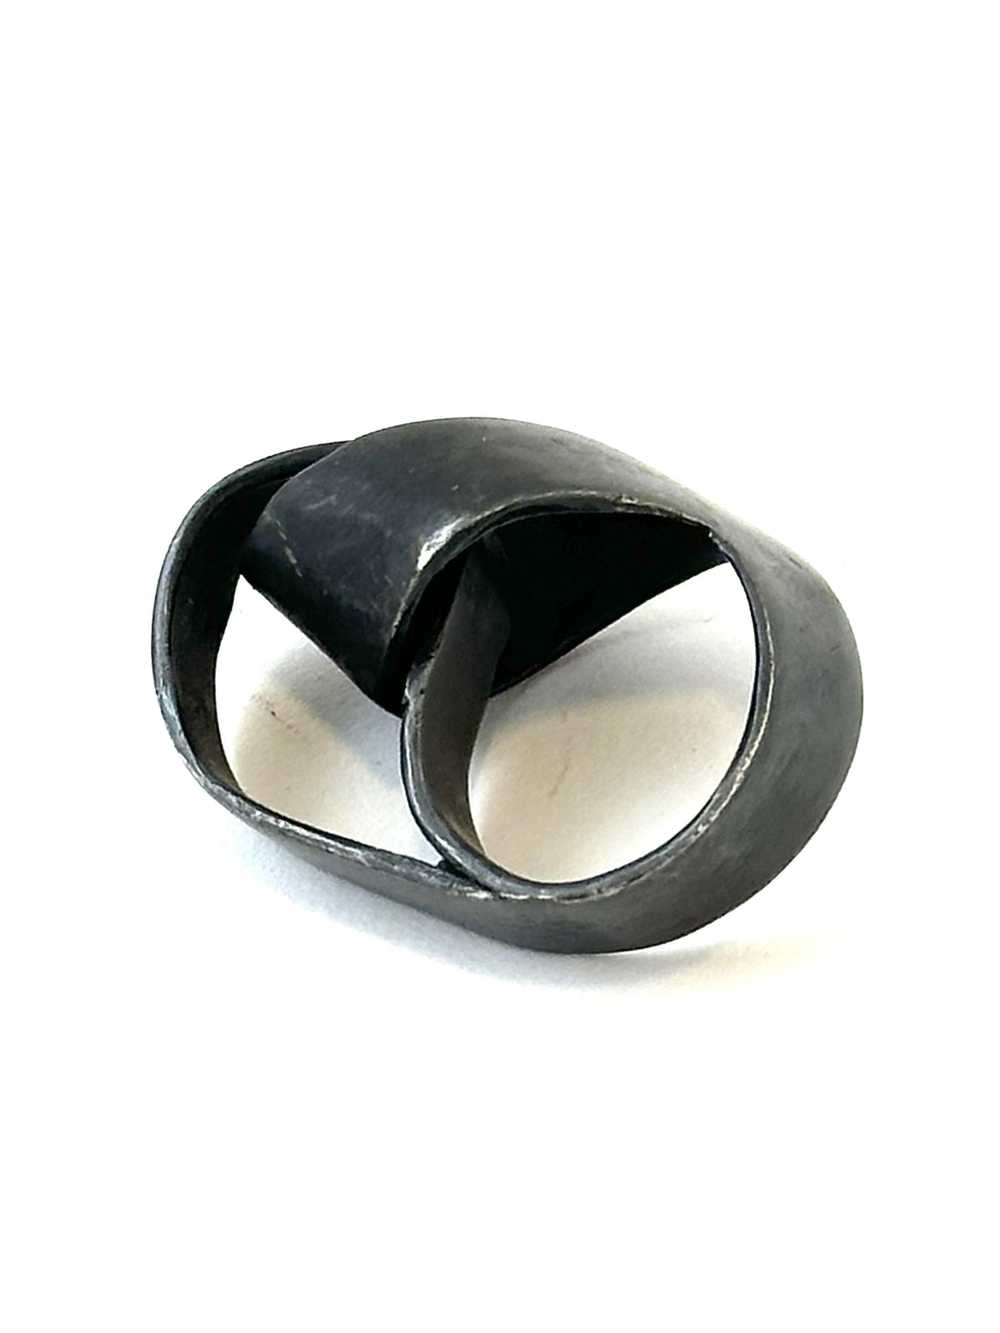 Oxidized Silver Sculpture Ring - image 2